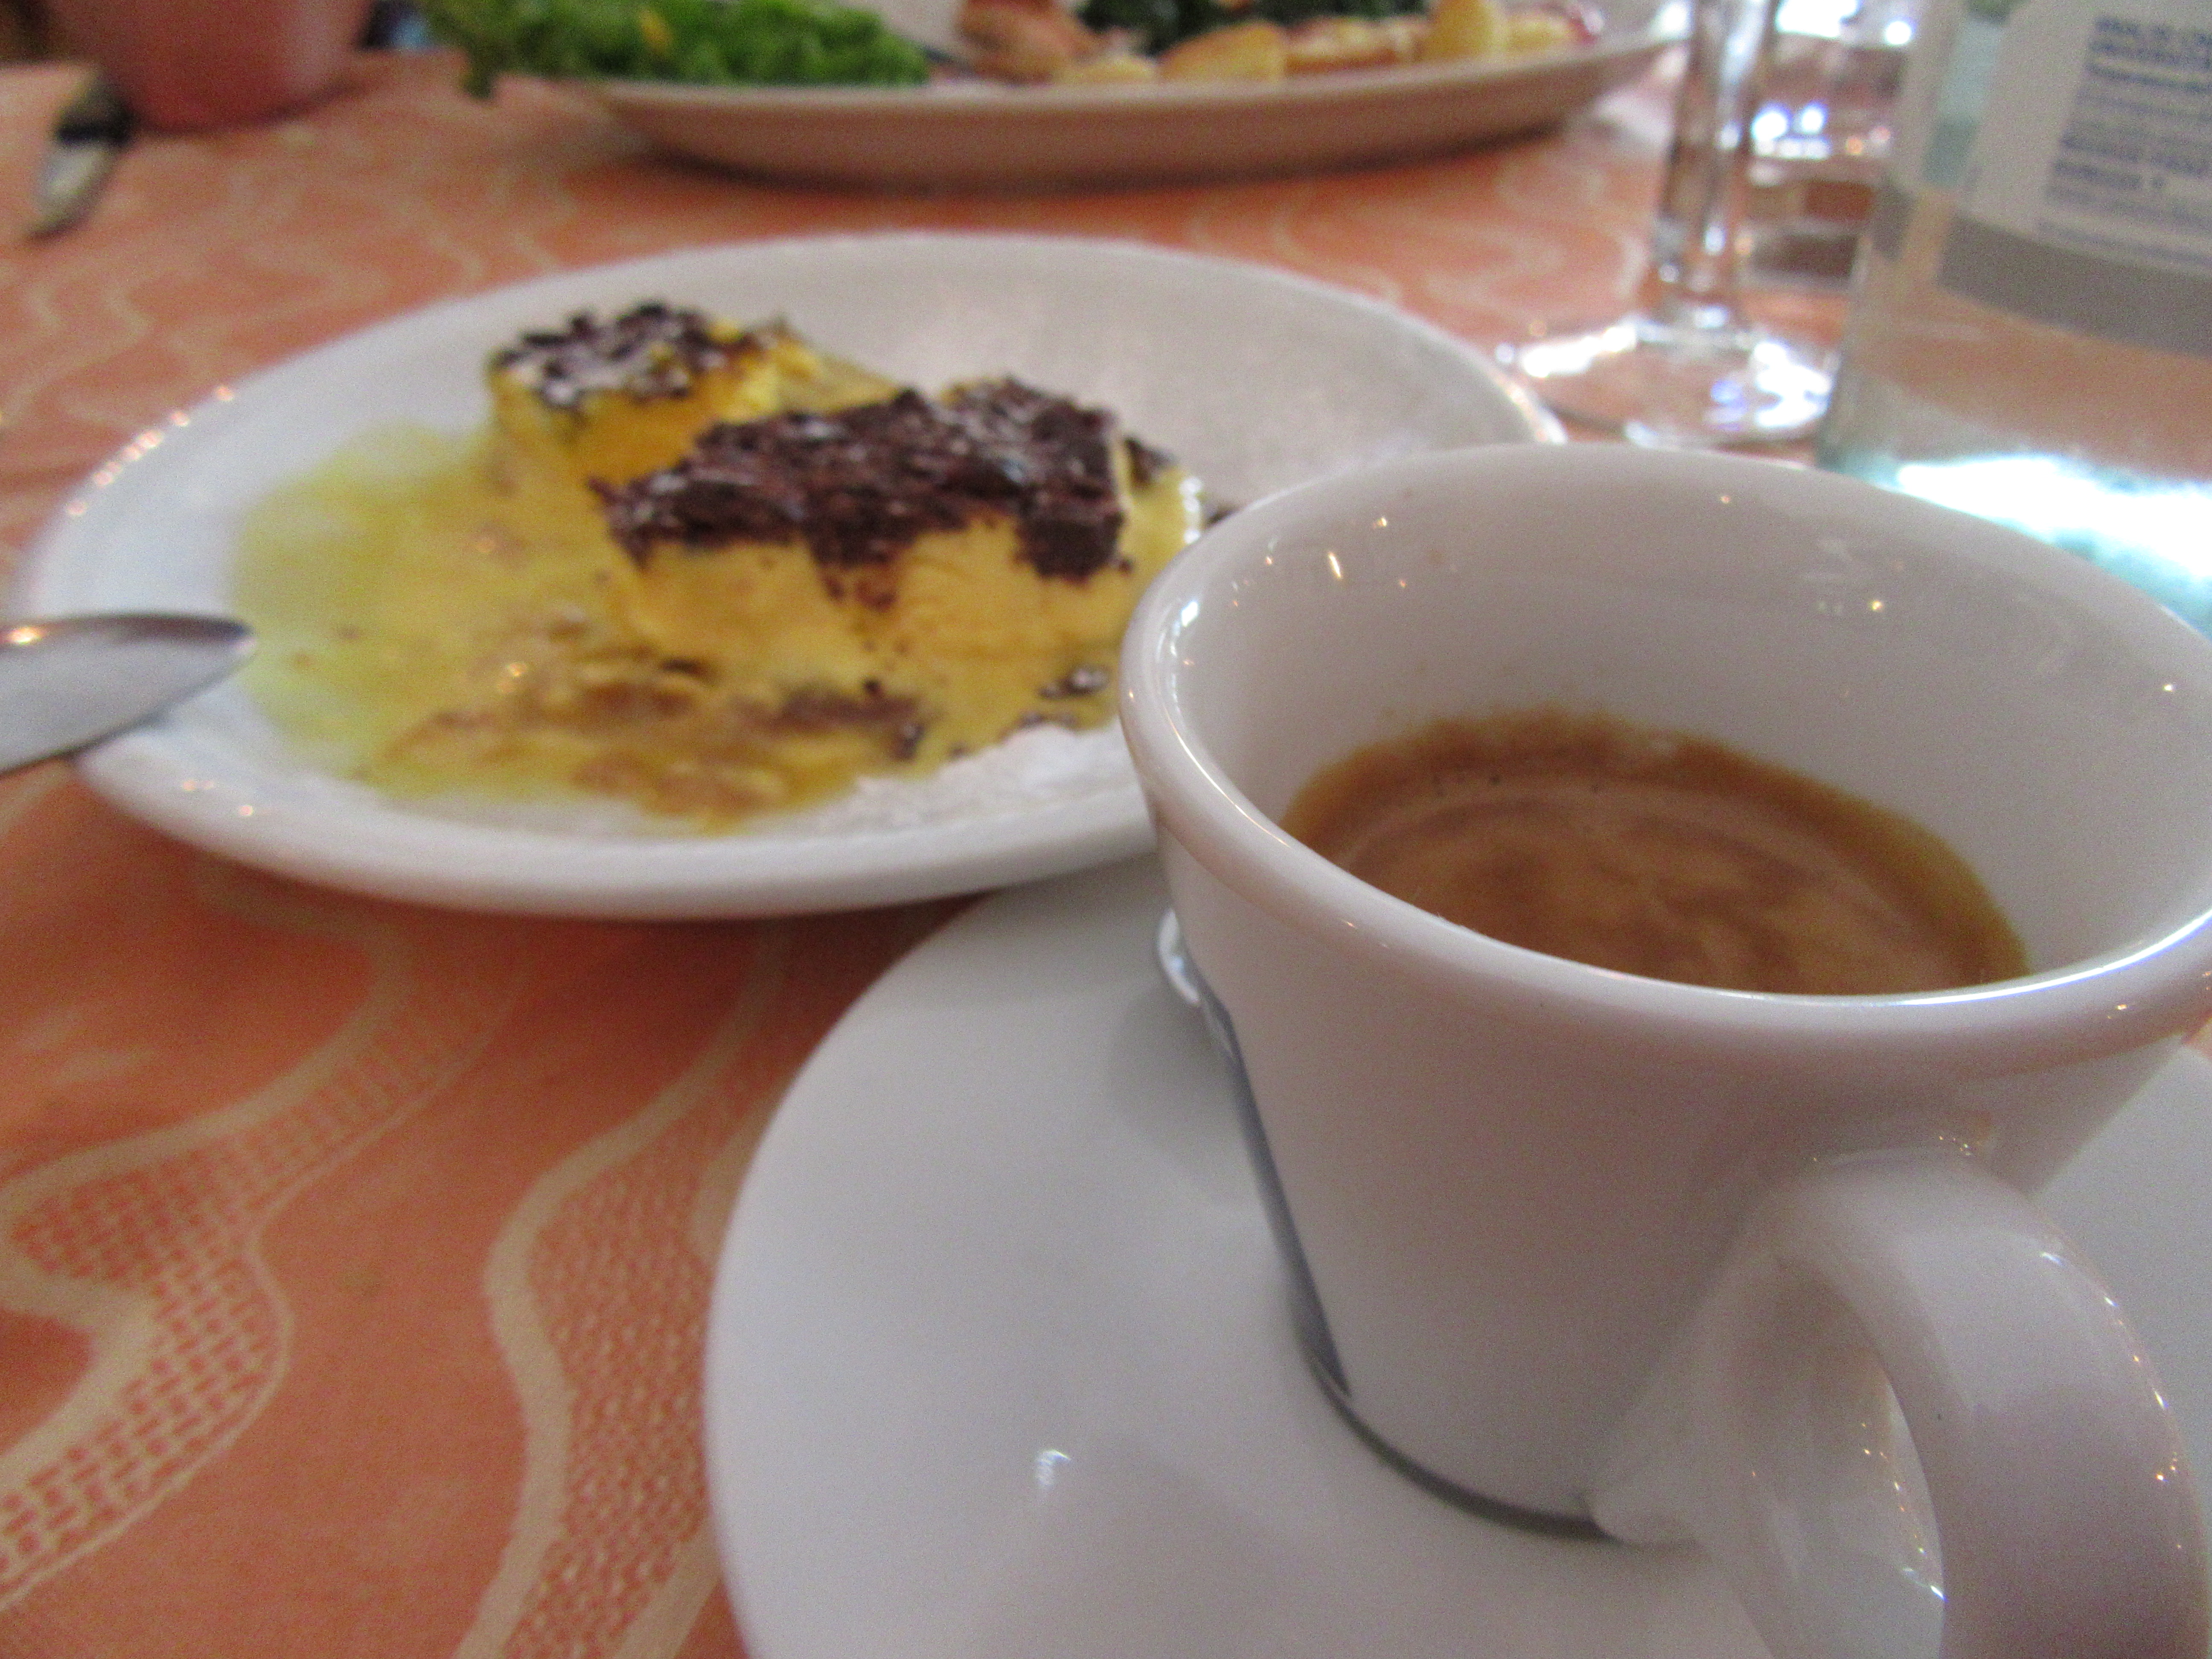 Zuppa Inglese is a local dessert